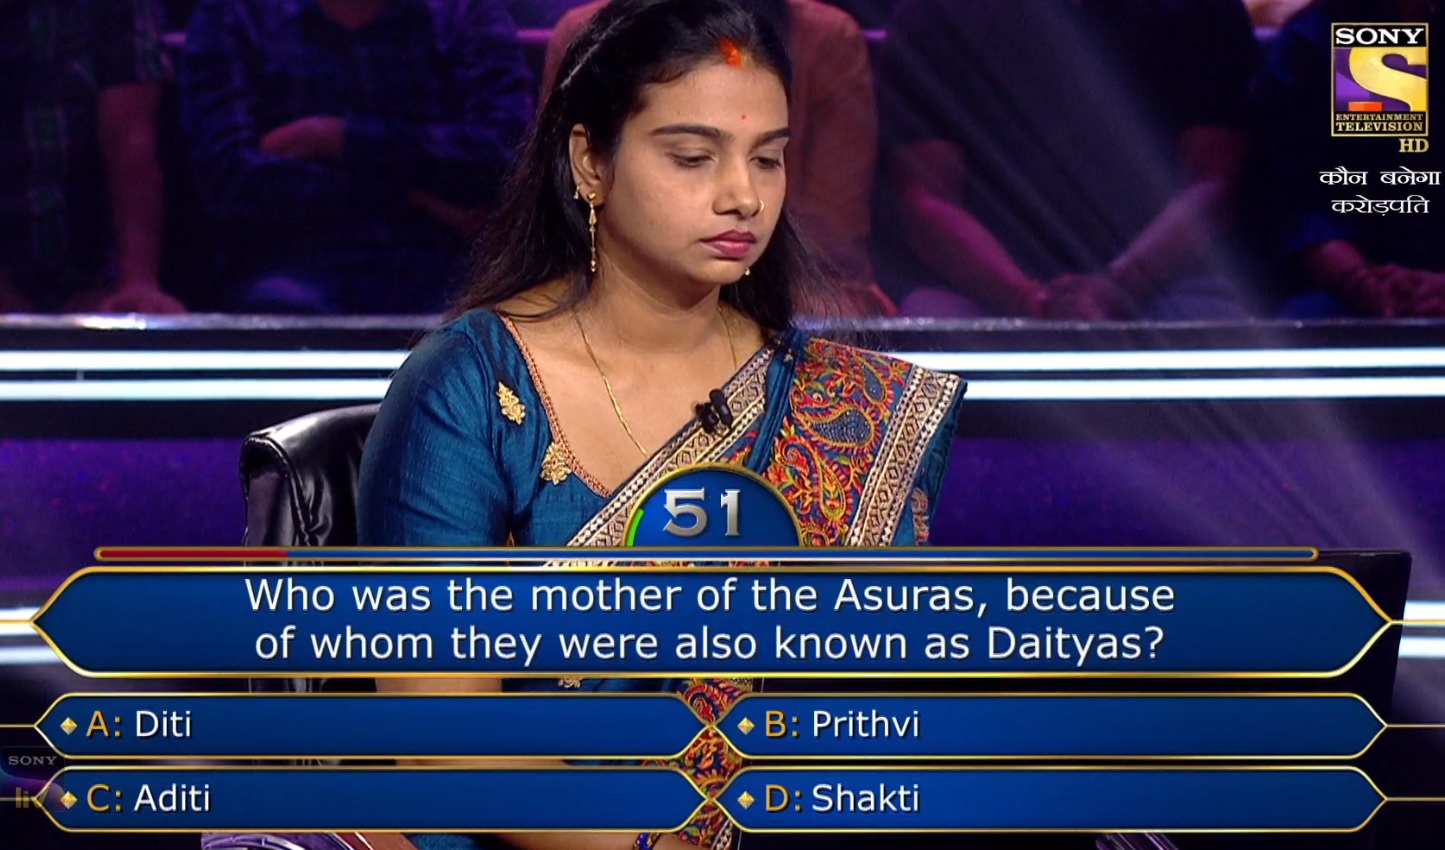 Ques : Who was the mother of the Asuras, because of whom they were also known as Daityas?